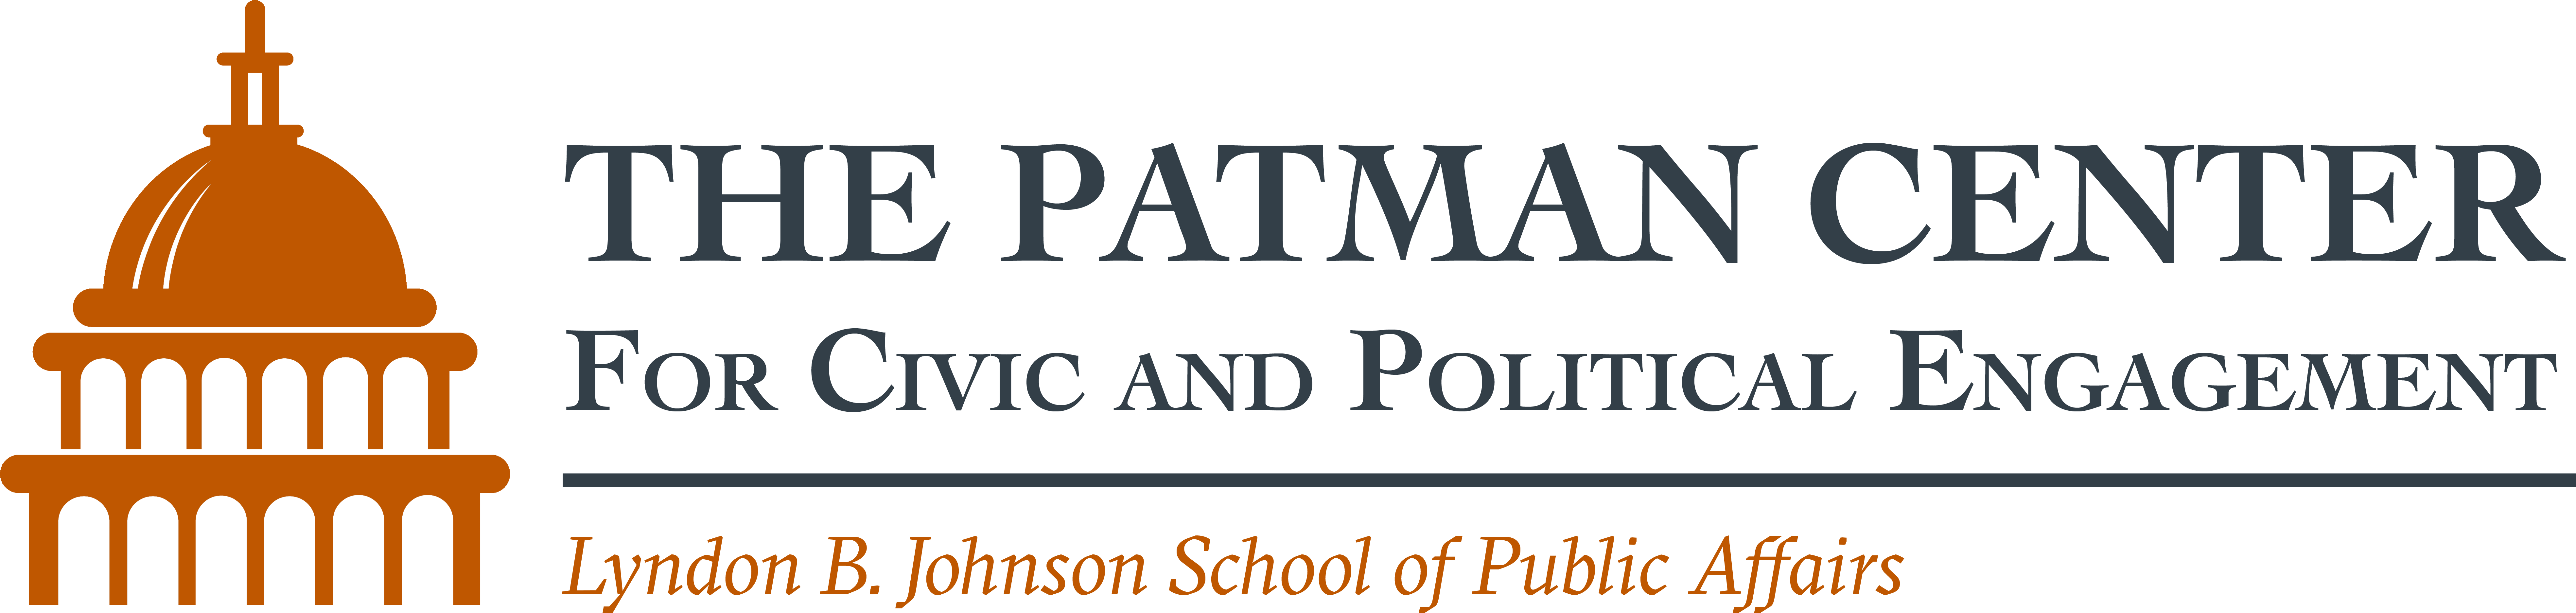 Patman Center for Civic and Political Engagement home